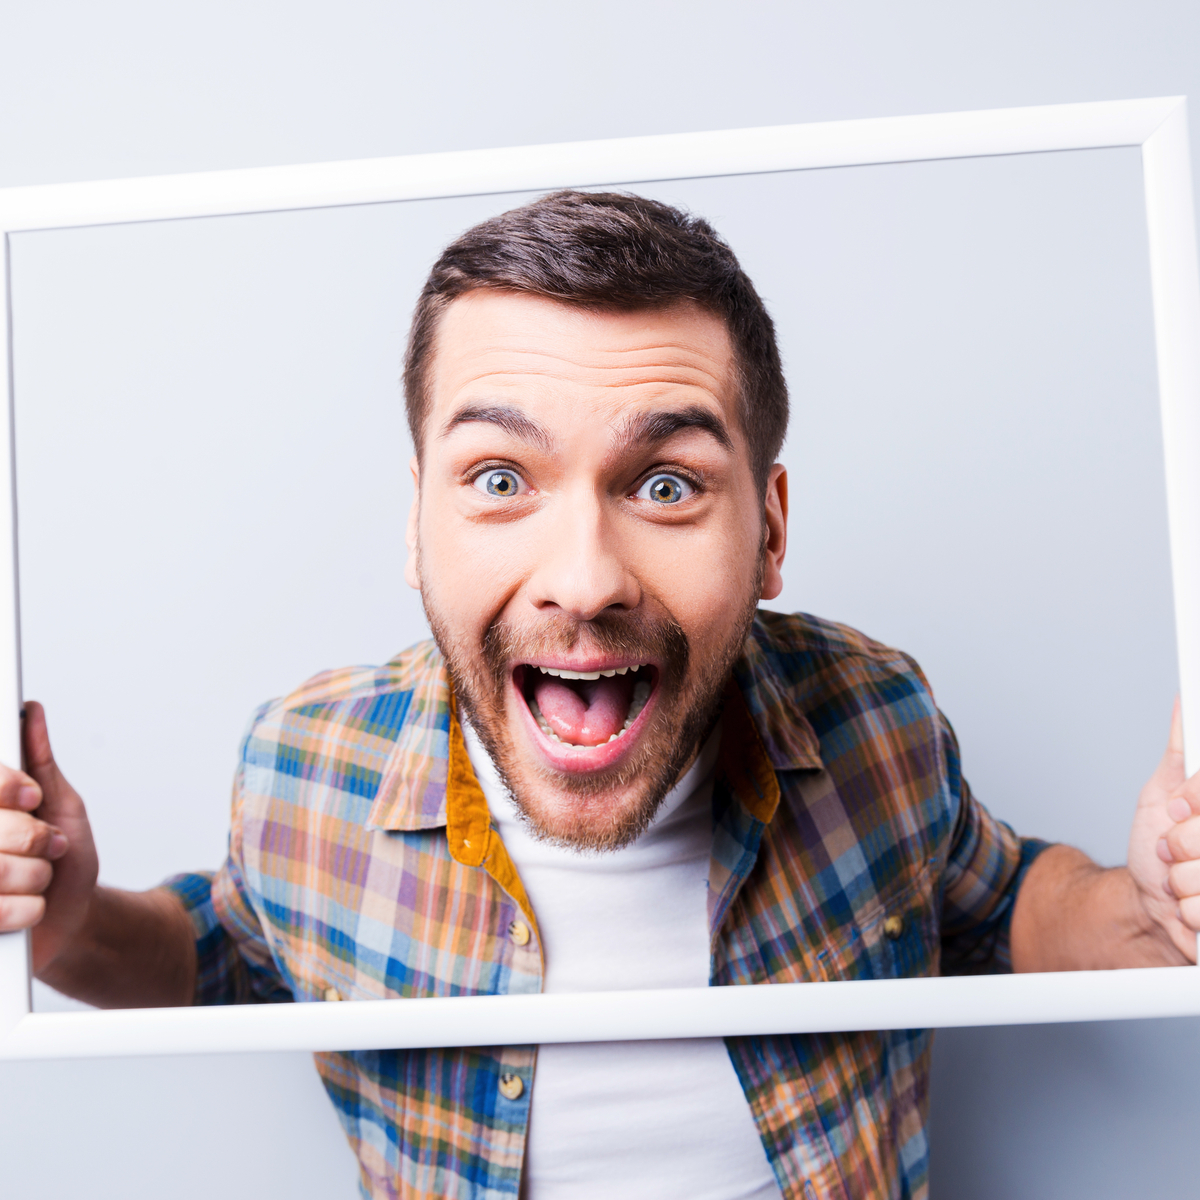 Smiling man holding picture frame around face